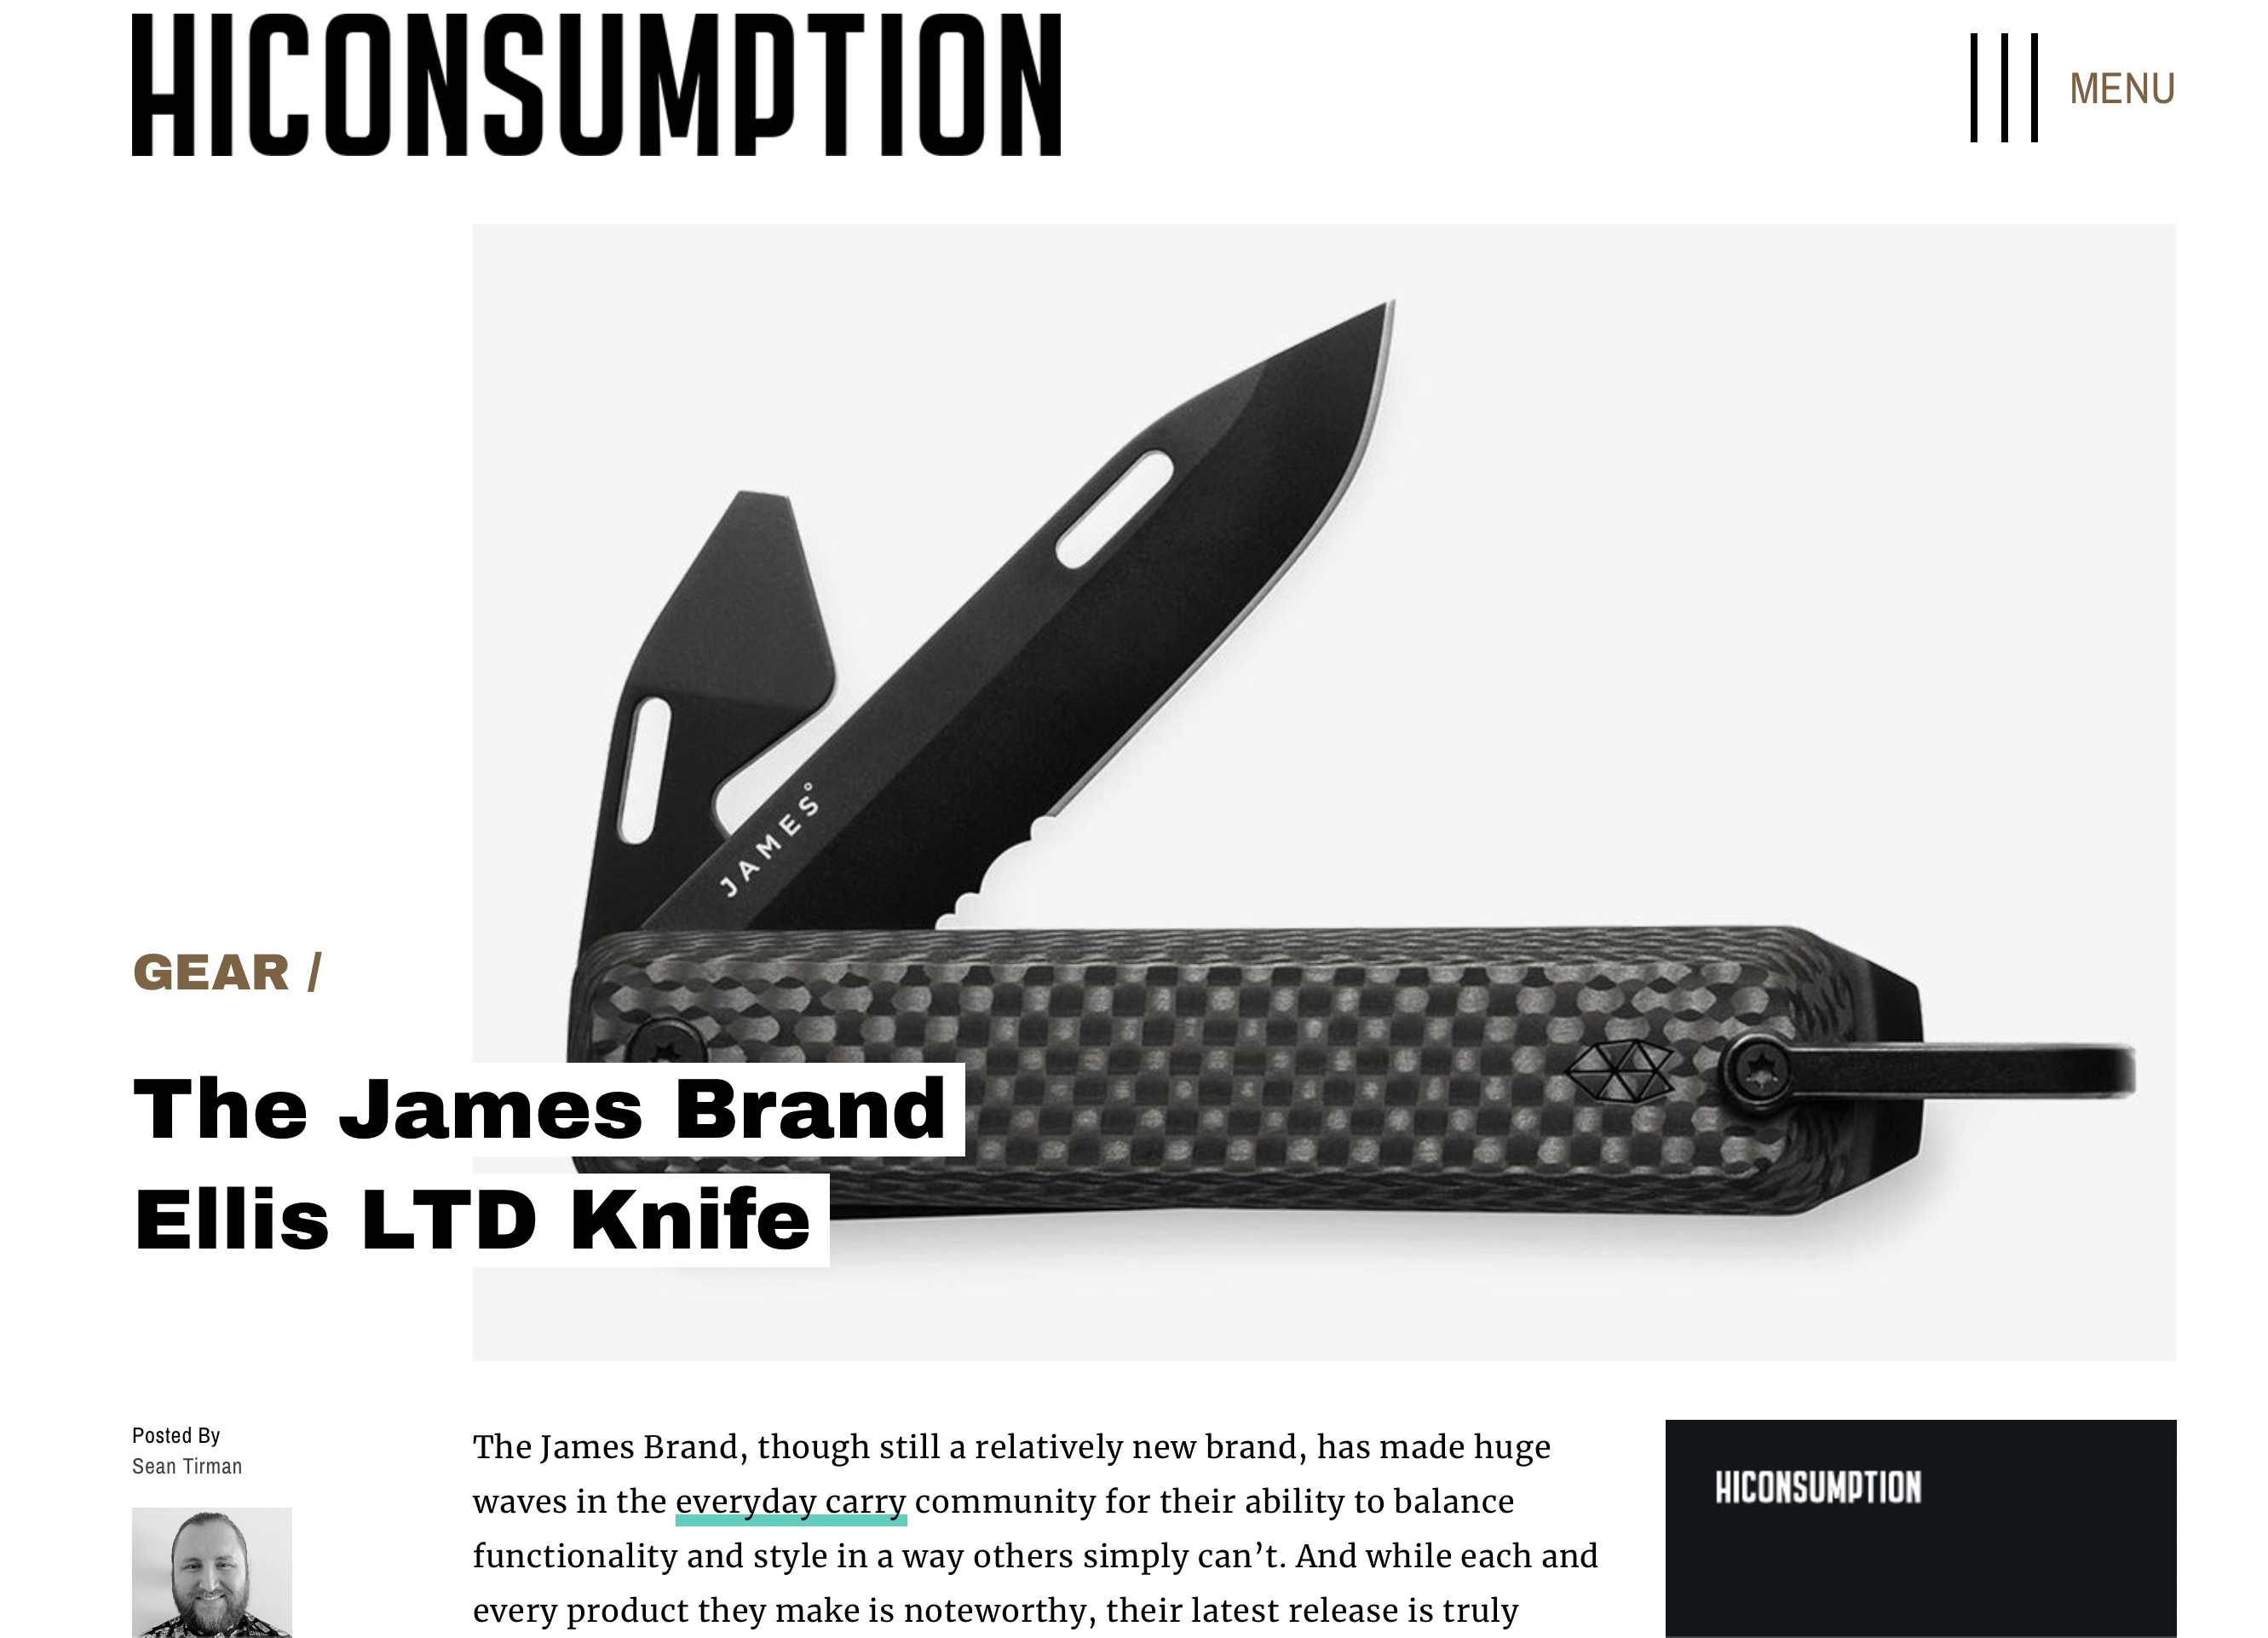 high consumption features the James brand knife